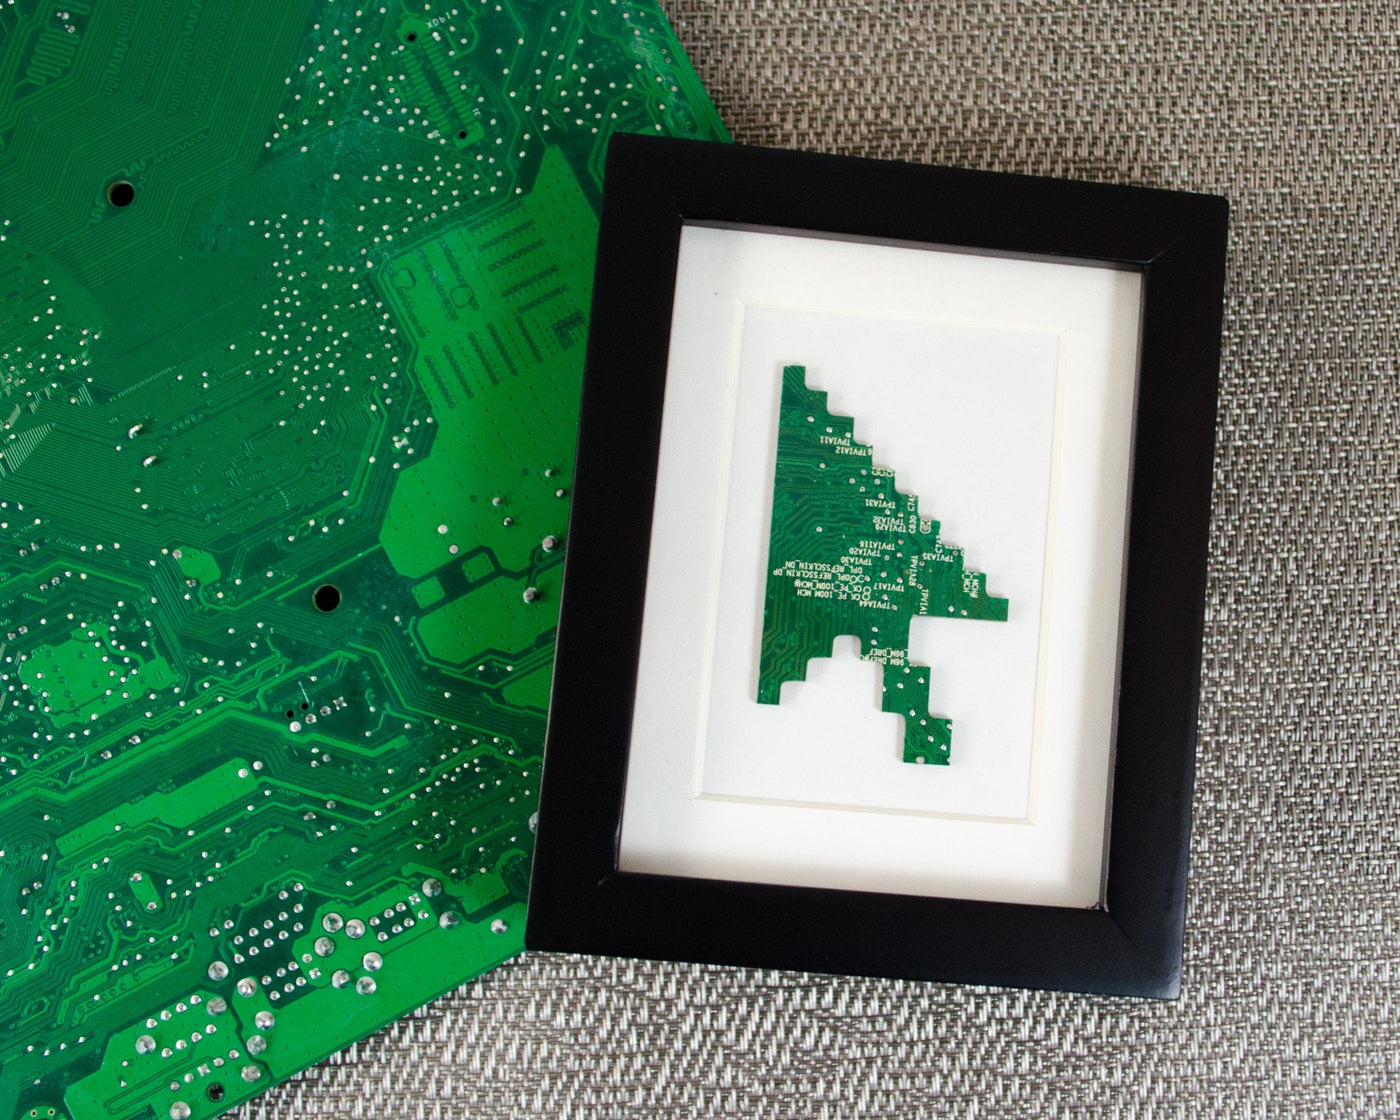 mini handmade framed art made from recycled green circuit board